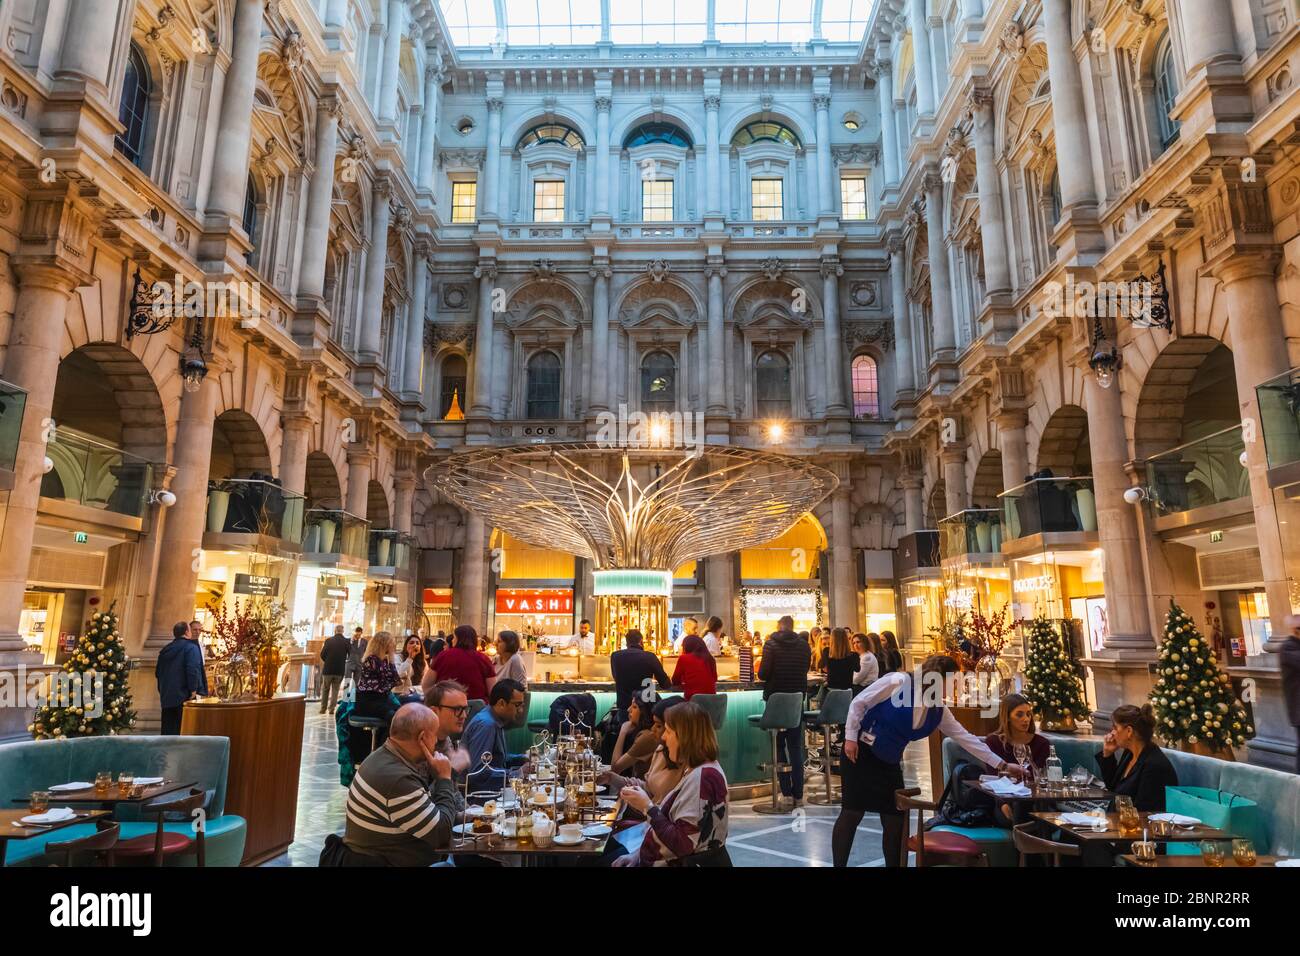 England, London, The City of London, The Royal Exchange, Customers Sitting at the Fortnum & Mason Restaurant and Bar Stock Photo